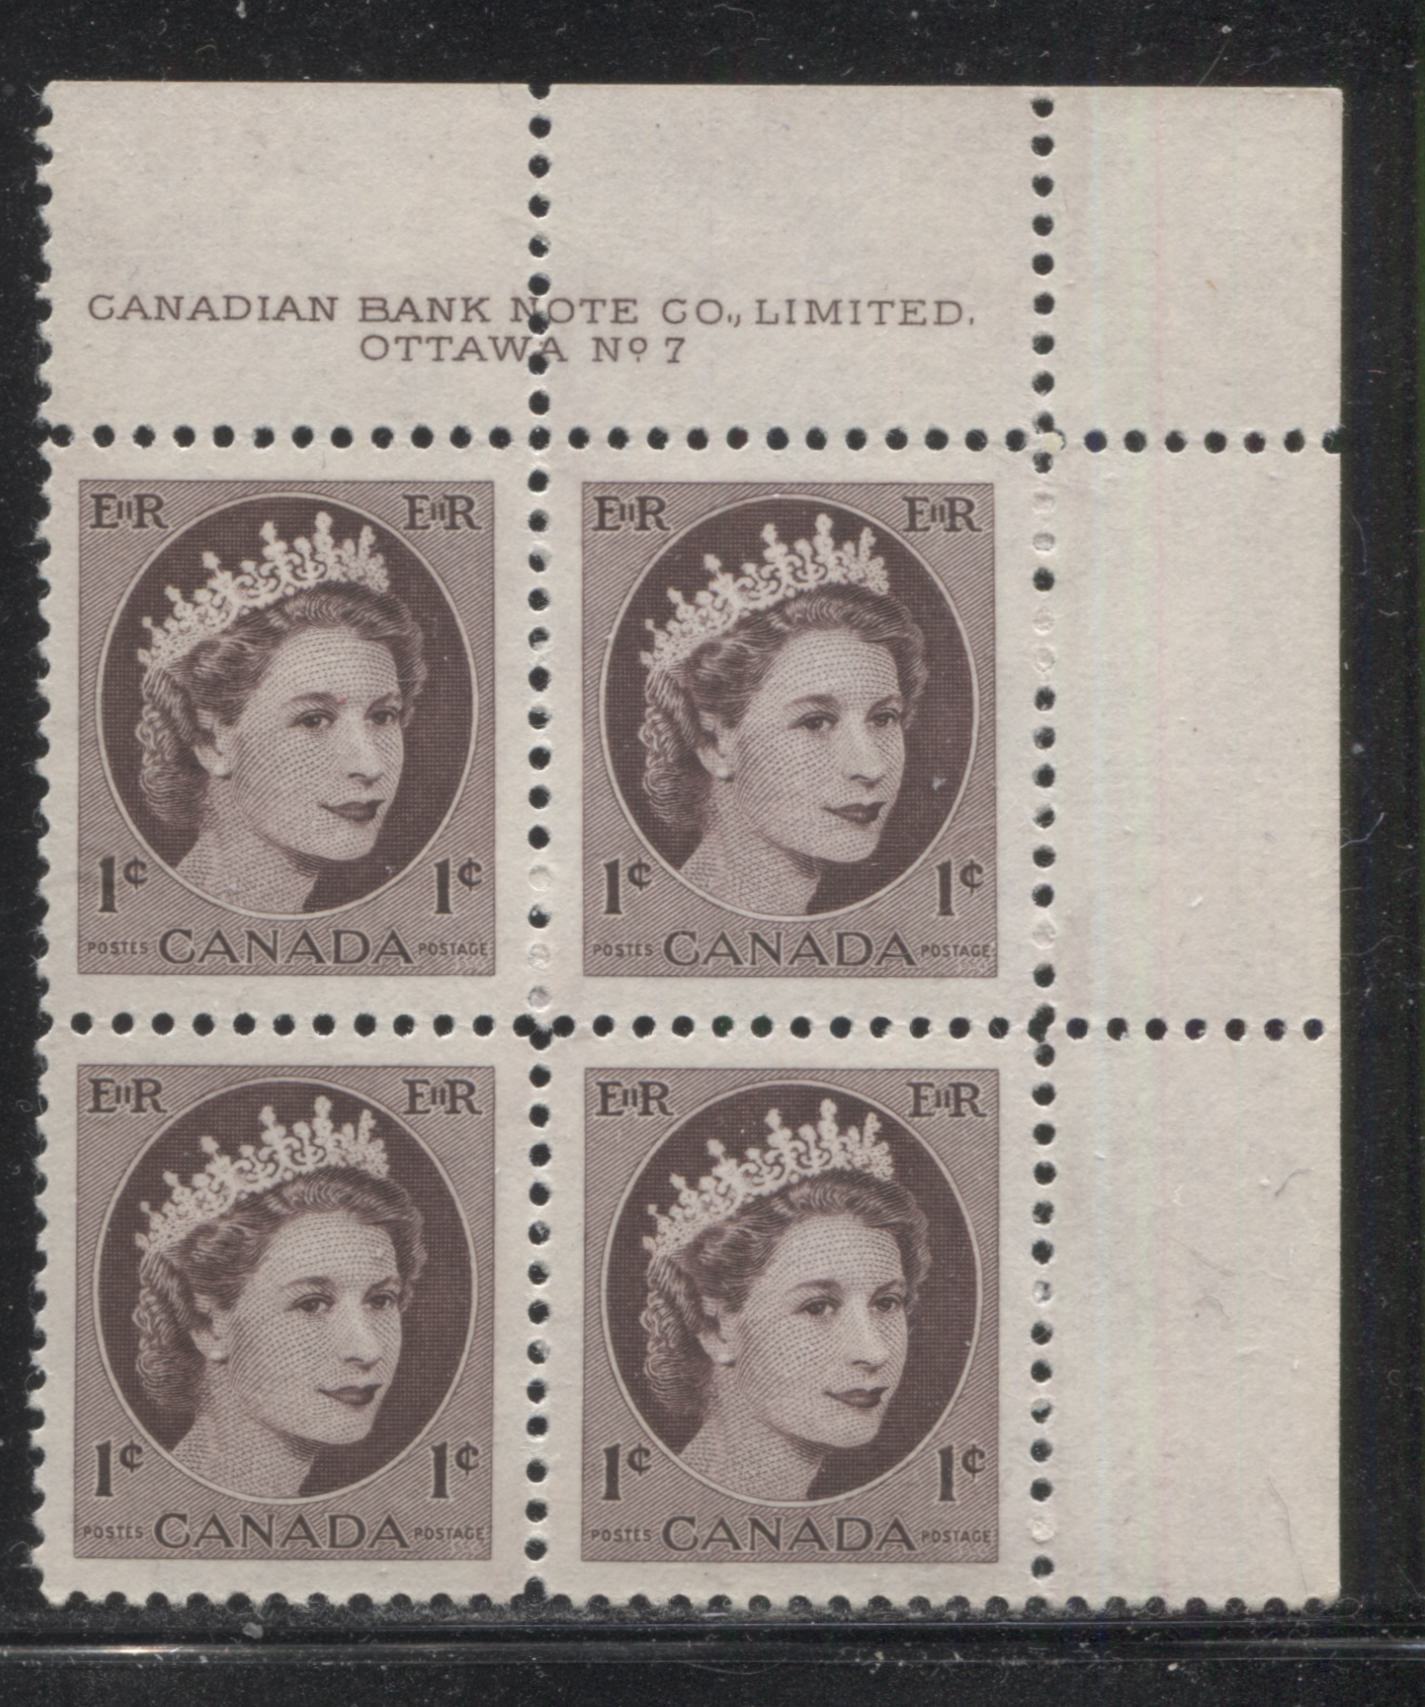 Canada #337 1c Deep Chocolate Queen Elizabeth II, 1954-1962 Wilding Issue, Upper Right Plate 7 Block of 4, Perf. 12, Bright DF Gr Smooth Vertical Wove, Streaky Satin Gum, VFNH Brixton Chrome 